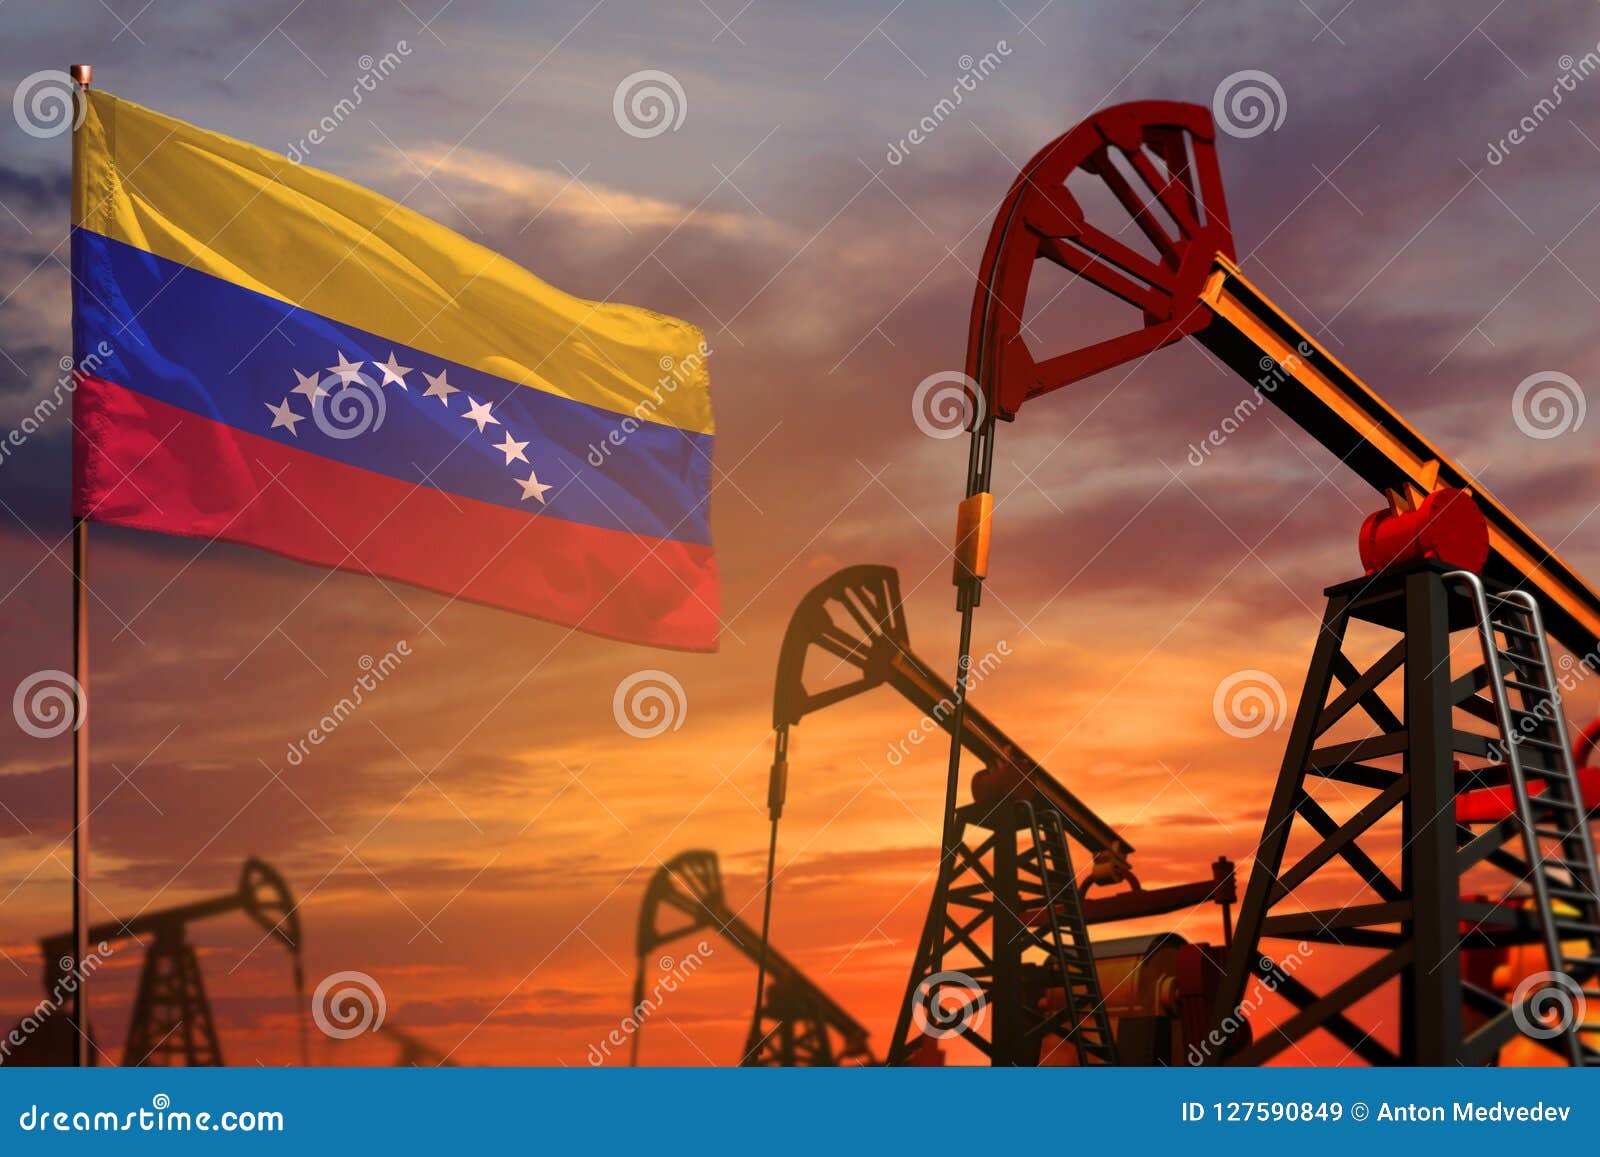 venezuela oil industry concept. industrial  - venezuela flag and oil wells with the red and blue sunset or sunrise sky